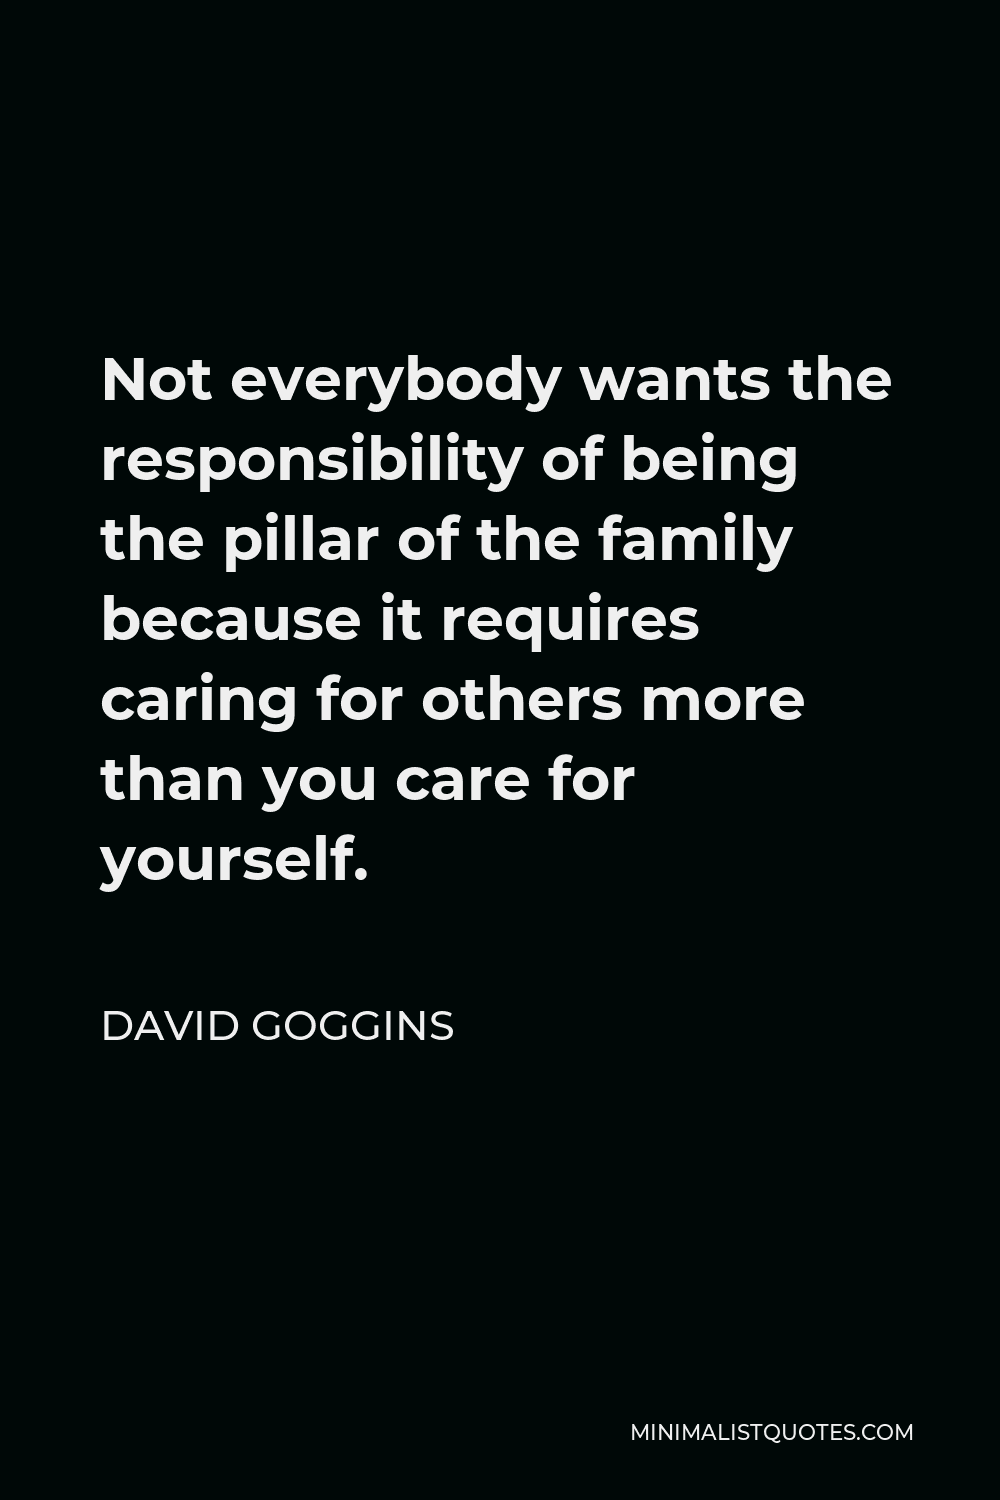 David Goggins Quote: Not Everybody Wants The Responsibility Of Being The Pillar Of The Family Because It Requires Caring For Others More Than You Care For Yourself.